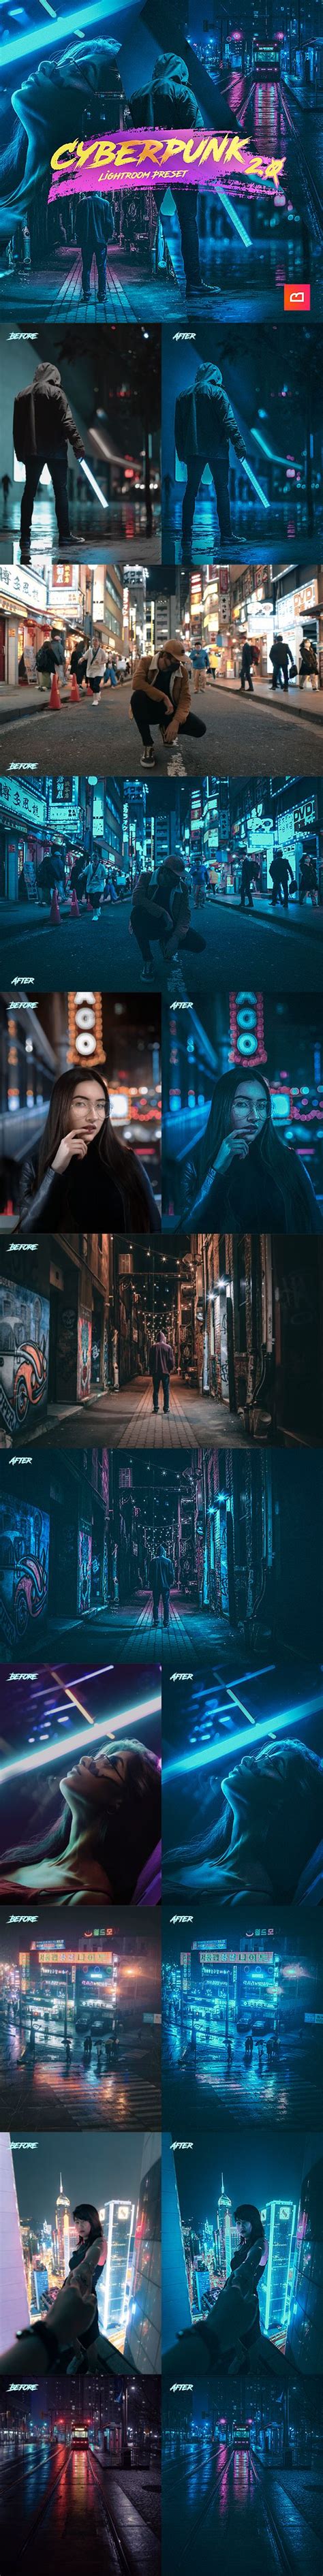 Give your photos the cyberpunk look with these lightroom presets and luts! Artistic Collection - Cyberpunk 2.0 Lightroom Preset ...